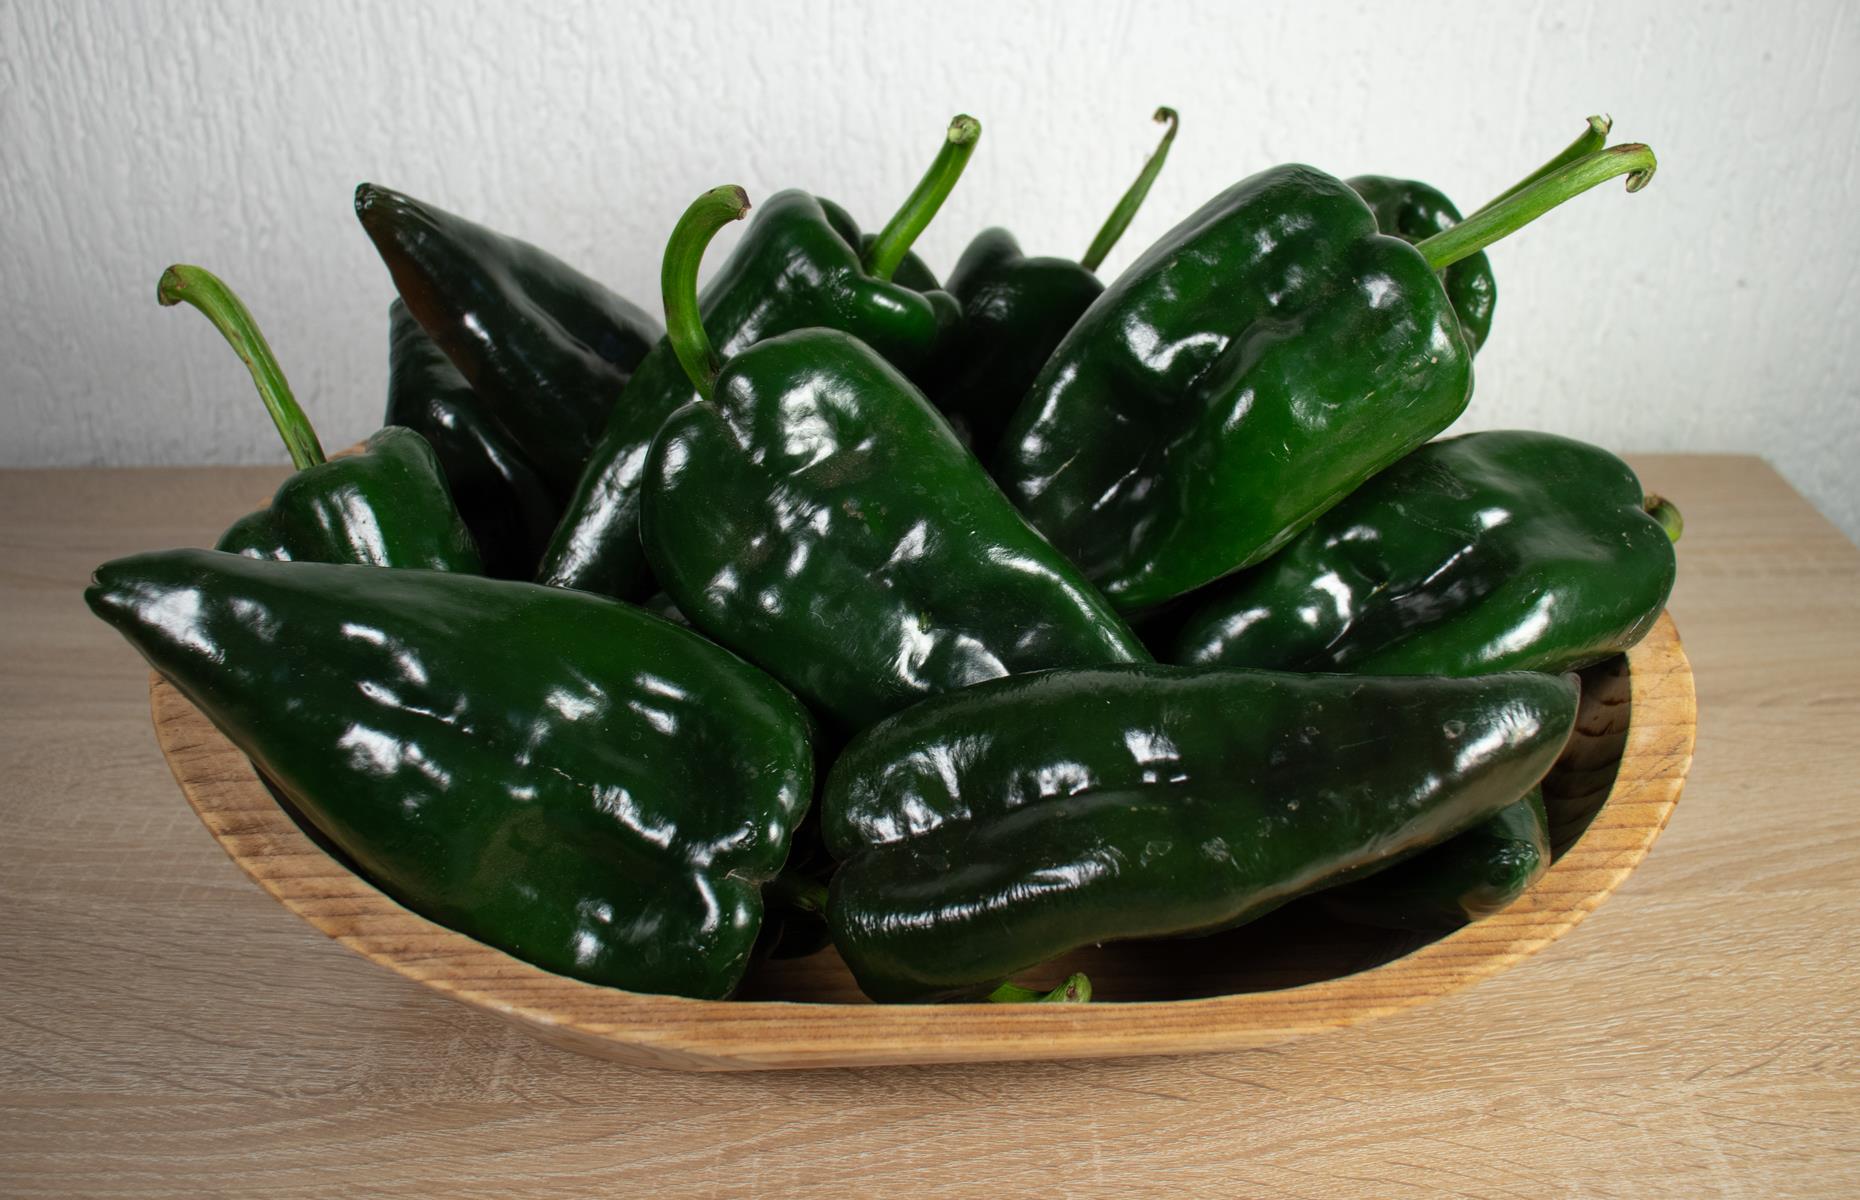 <p>This is a big chili – nearly as large as a green pepper – and it's very popular in Mexico. It's mild and fruity, often featured in chili con carne, made into a creamy sauce or used as mole poblano (a sauce with chocolate served with meat). When dried, poblano becomes ancho chilies. Try our Mexican roast chicken dish, where ancho makes a marinade and it's served with a citrus slaw.</p>  <p><strong><a href="https://www.lovefood.com/recipes/112878/ancho-rub-pot-chicken-recipe">Get the recipe for ancho rub pot chicken here</a></strong></p>